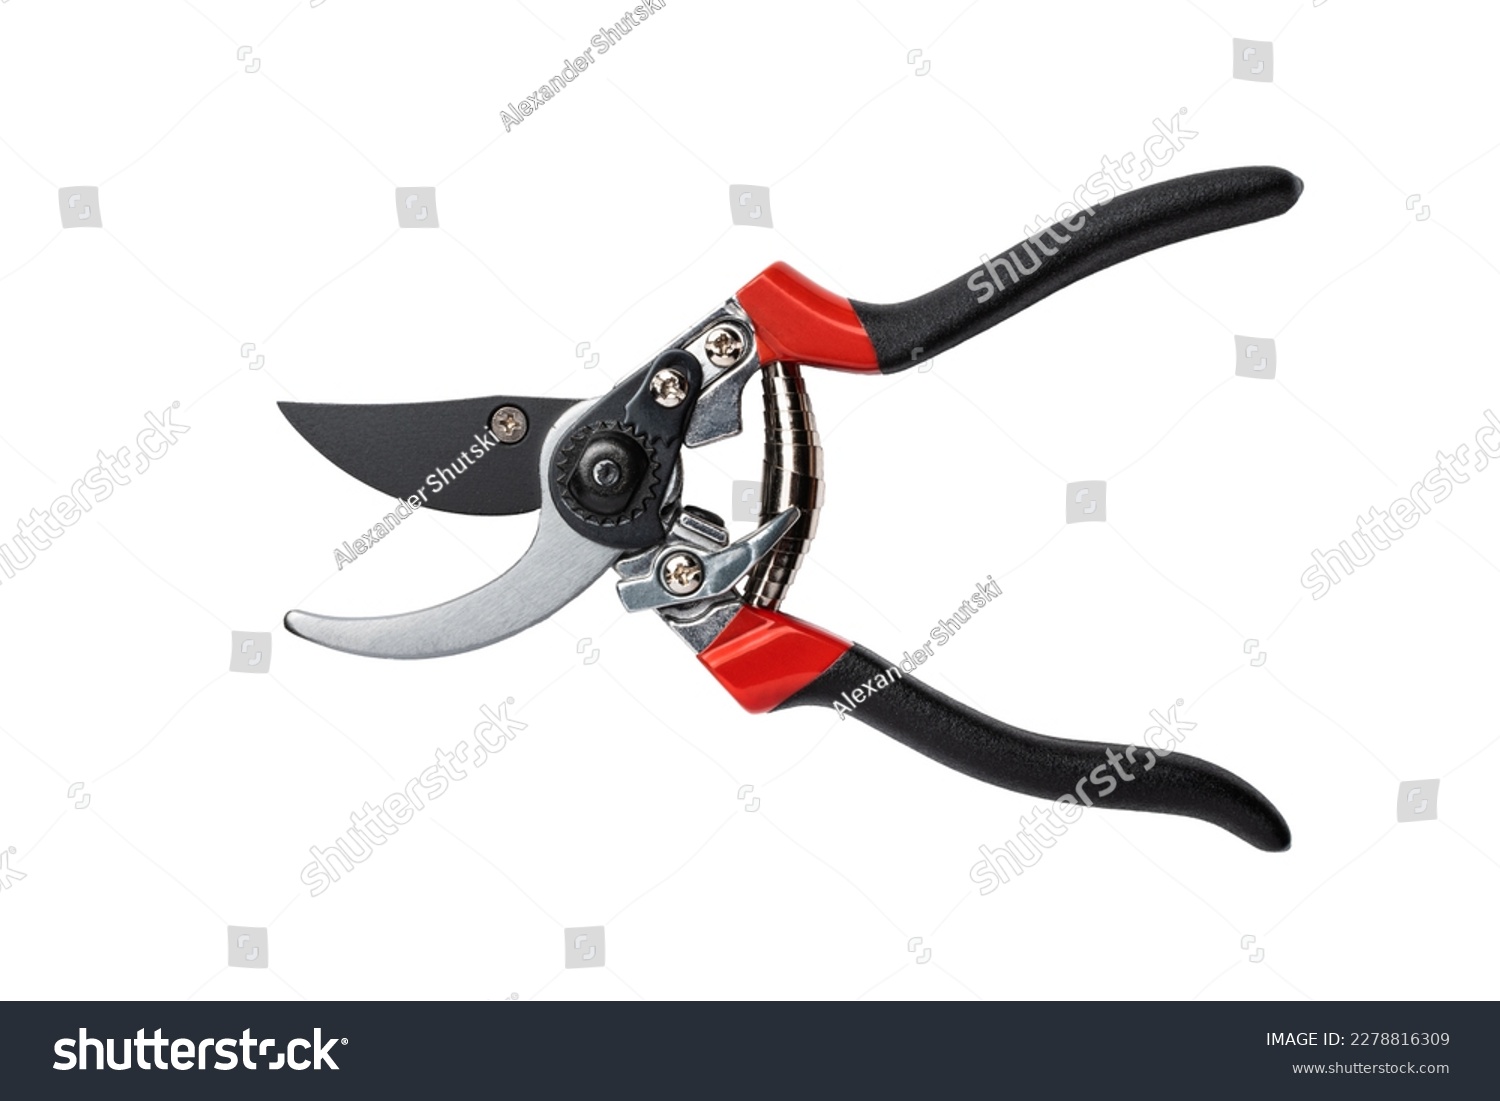 Secateurs. The hand tool is designed to remove shoots and small branches when forming the crown of small trees and shrubs. Isolated on white background. Open state. Top view. #2278816309